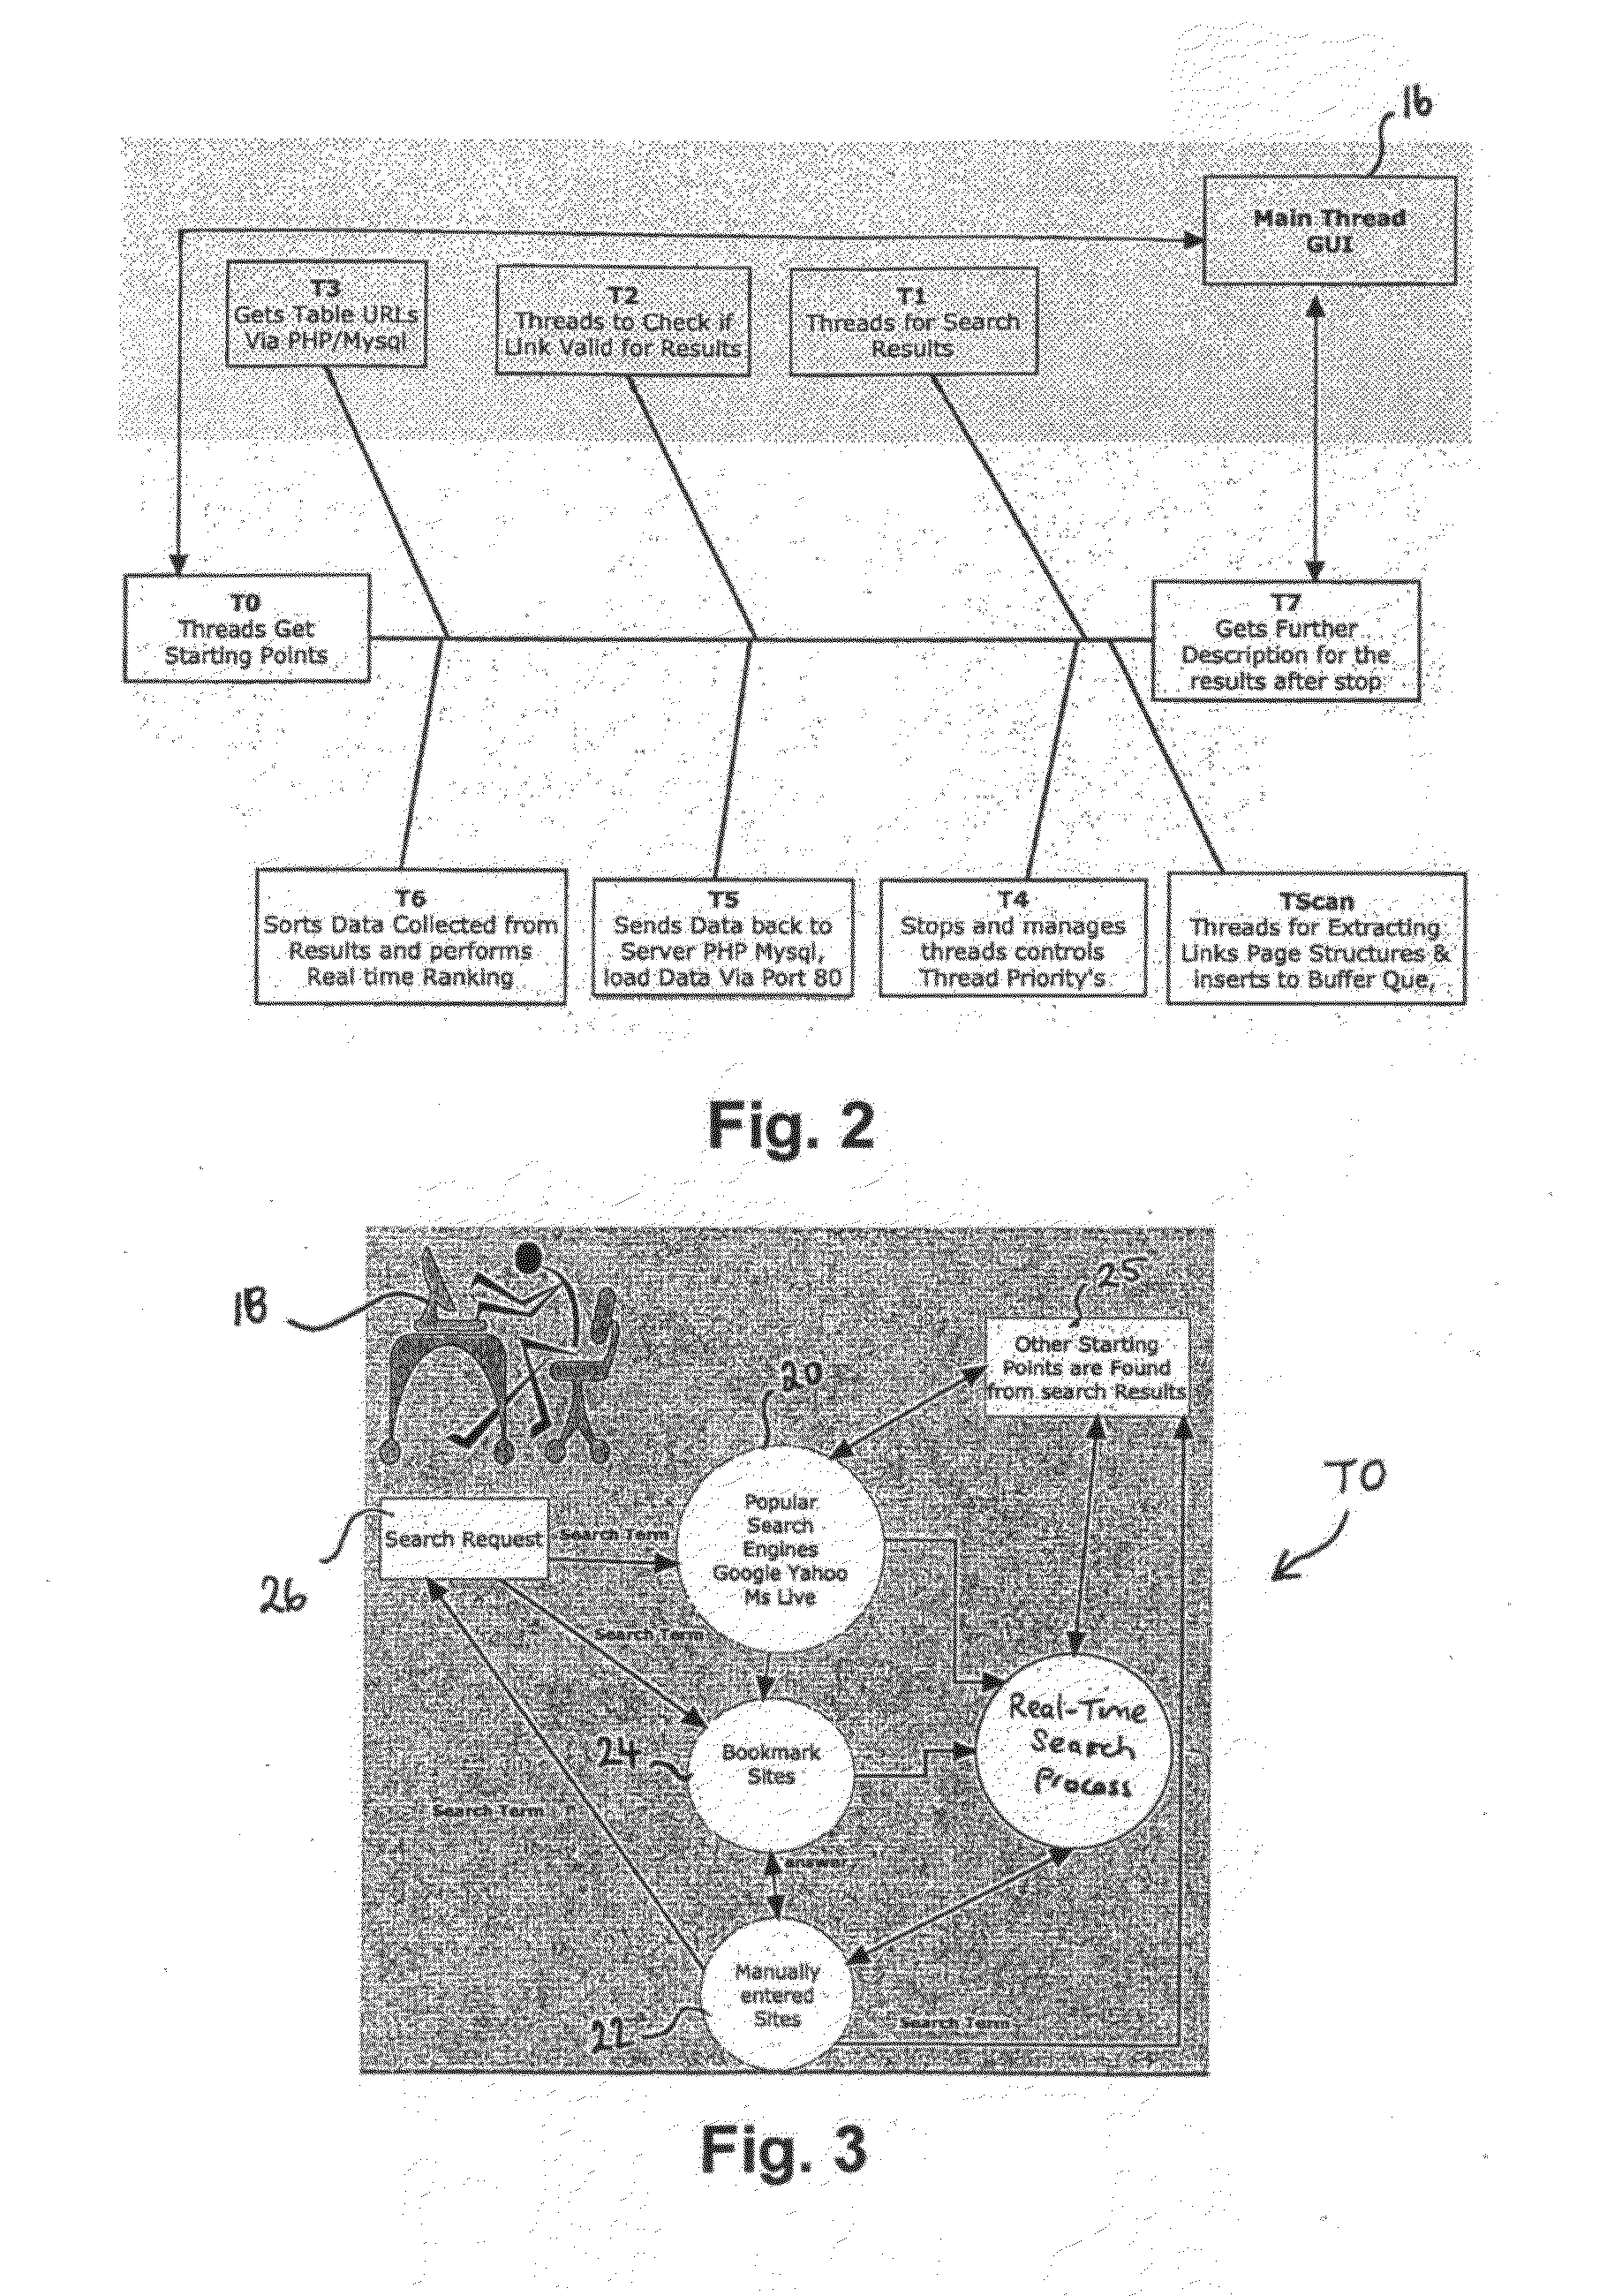 Method and/or System for Searching Network Content